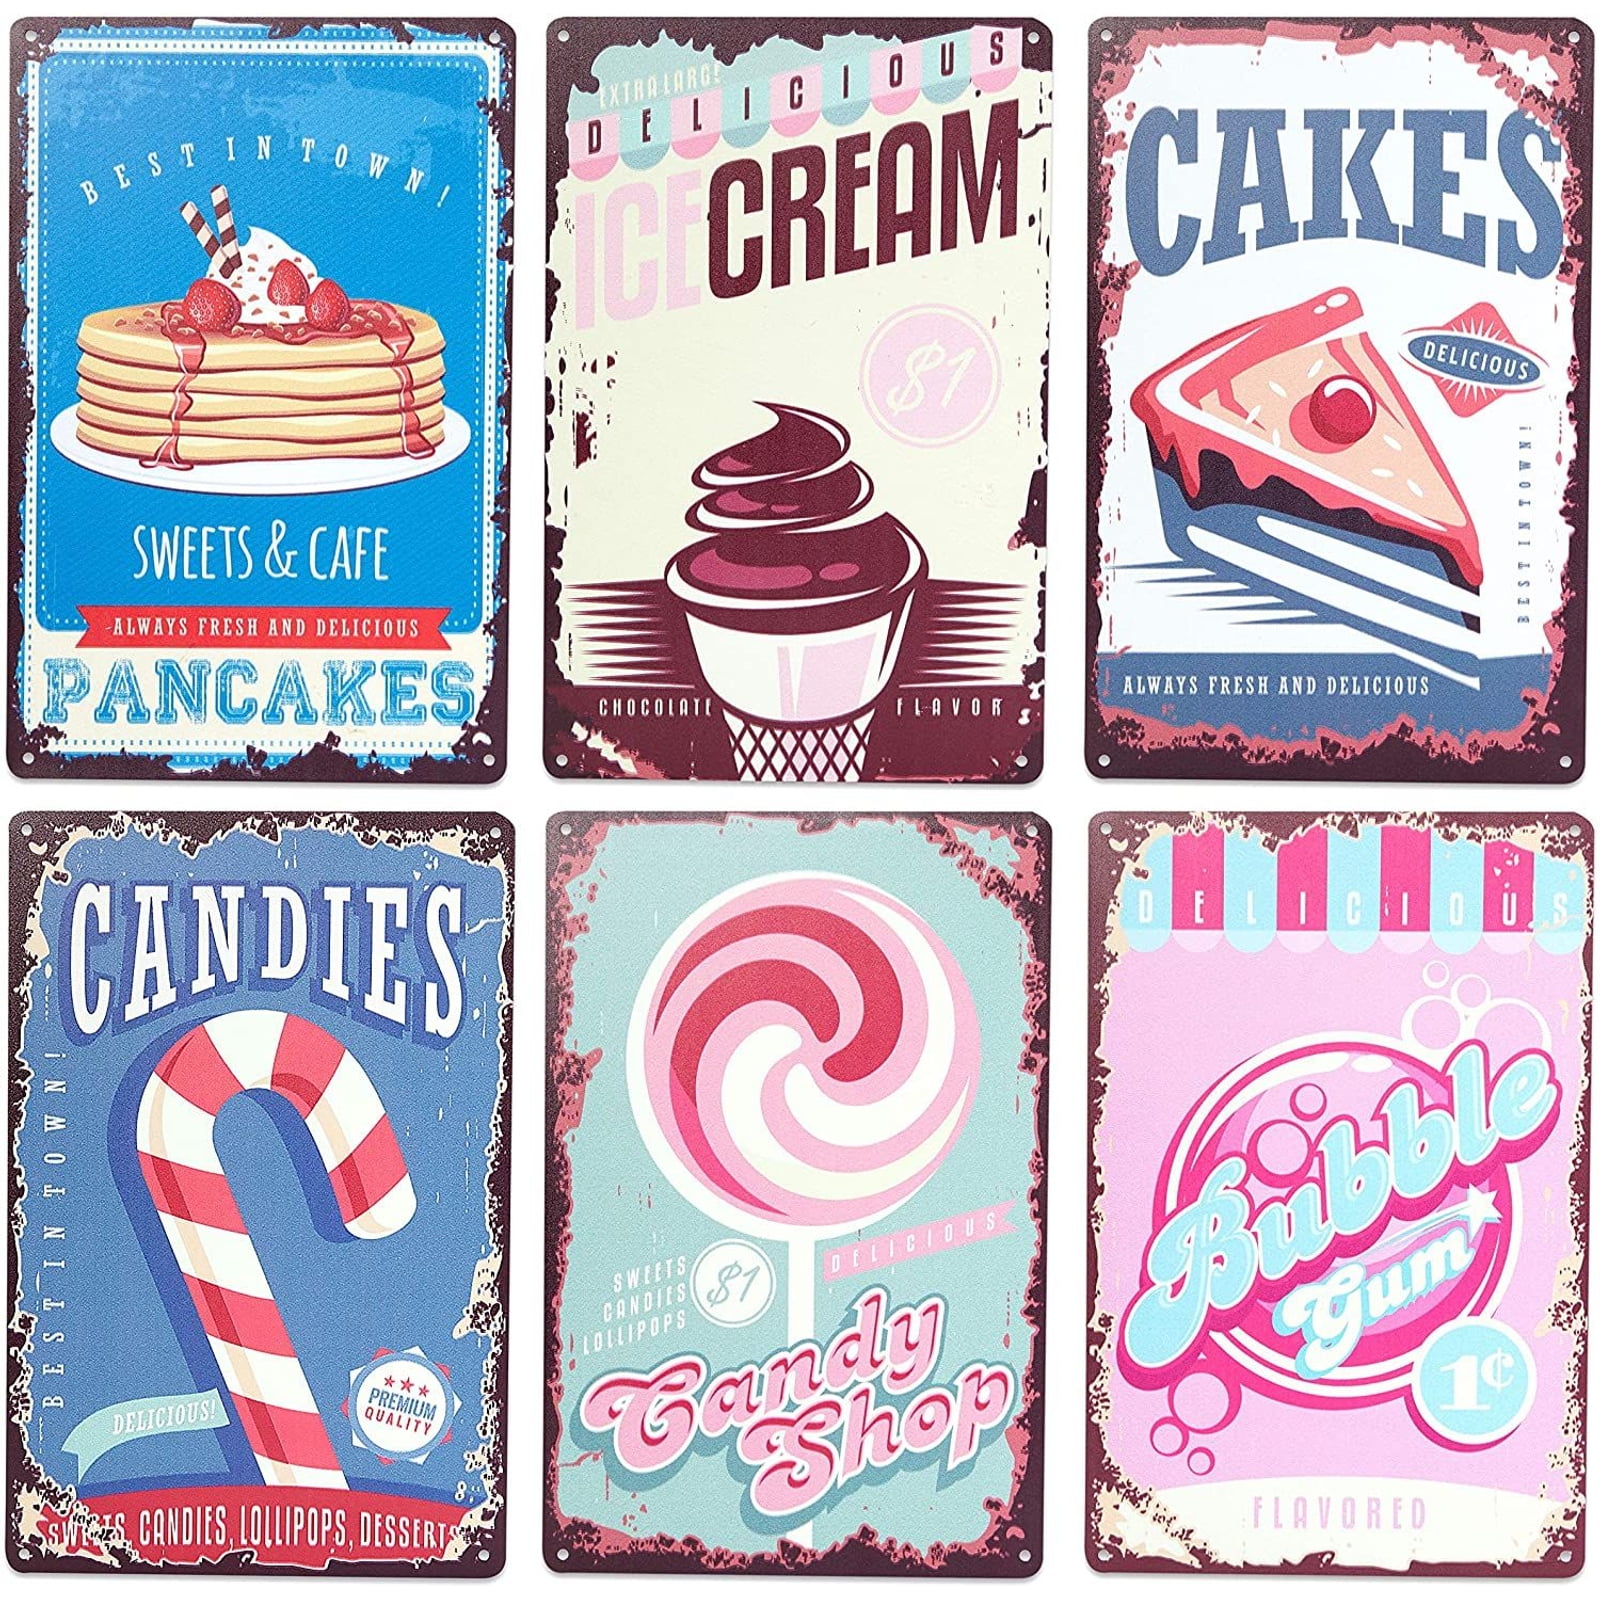 BAKERY Vintage Style Metal Tin Sign 4 Candy Shop General Store Bakery 